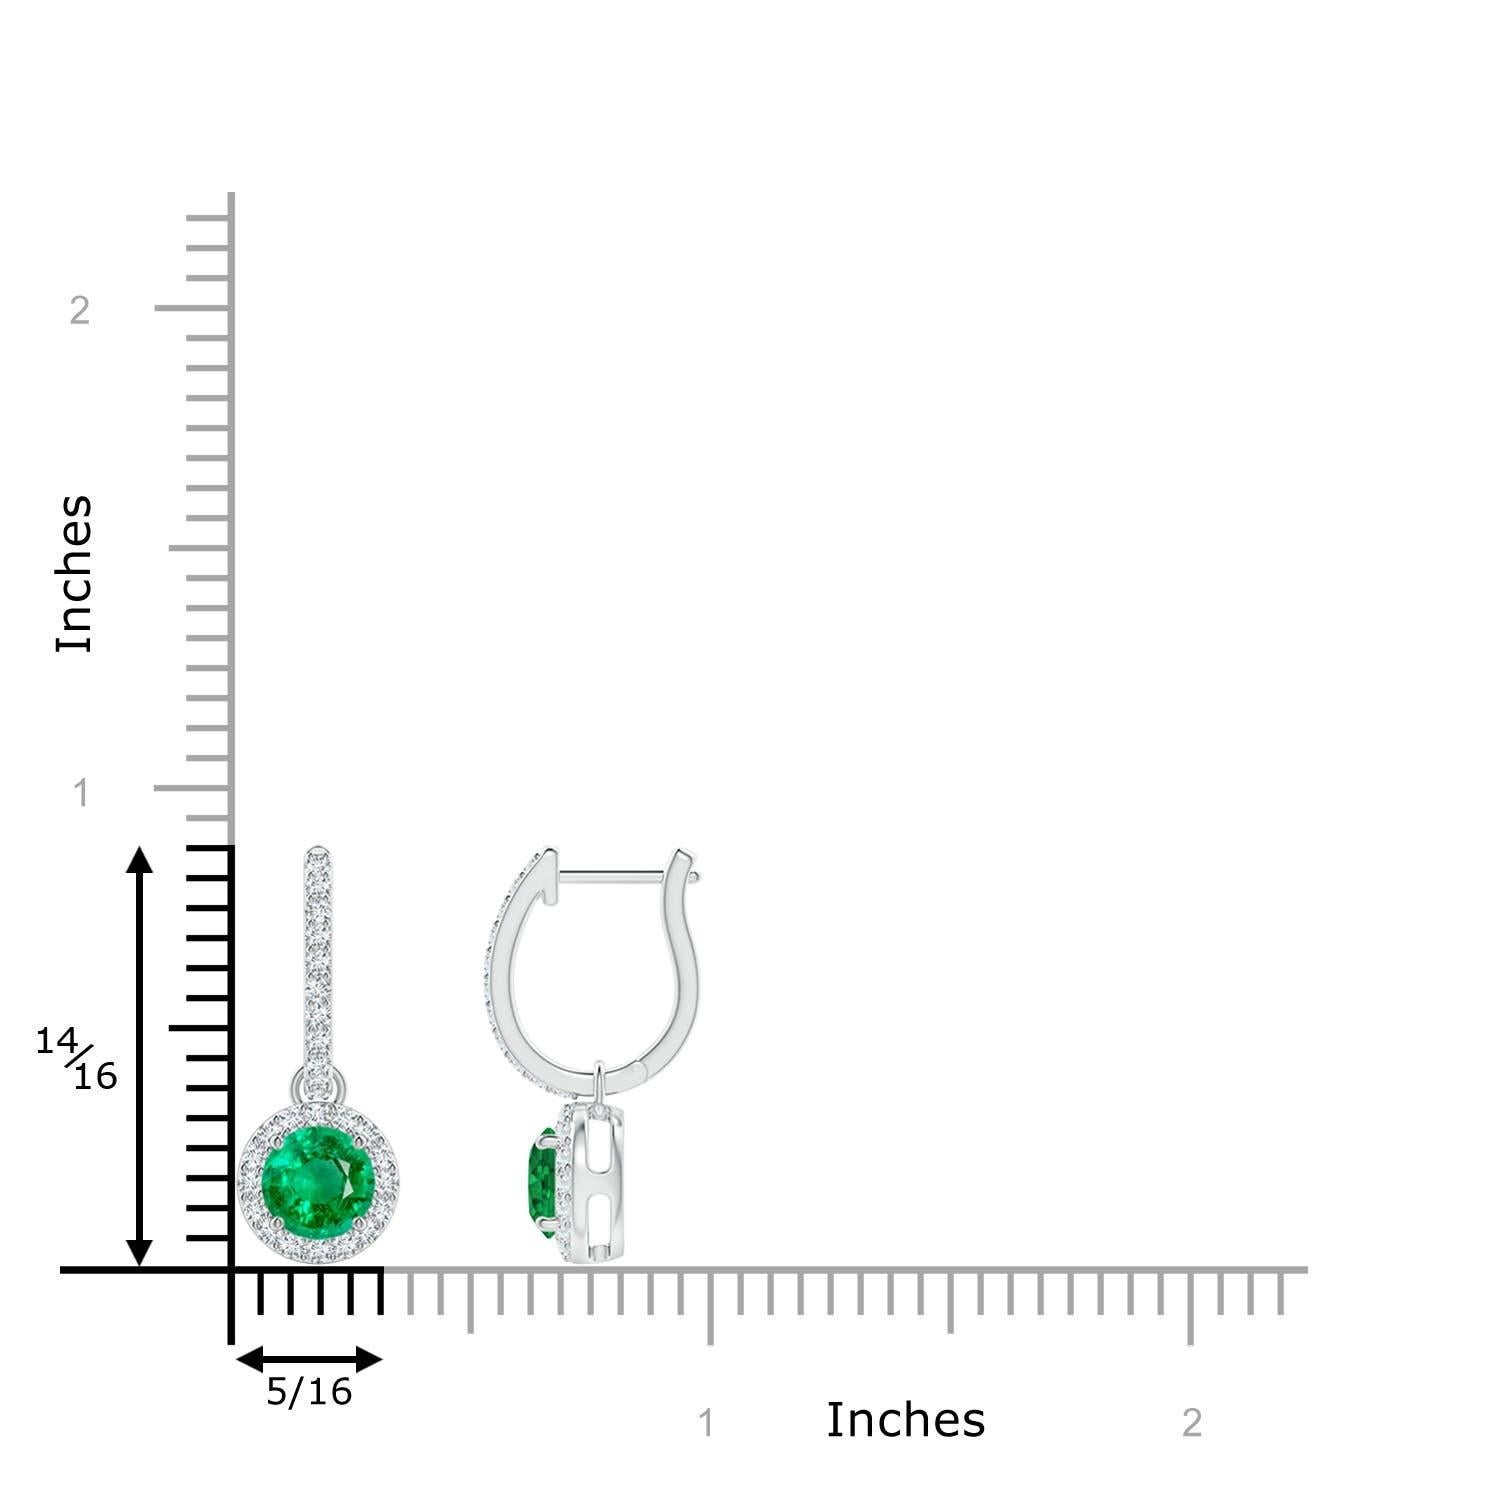 Nestled within a glimmering halo of round diamonds are round lush green emeralds in prong settings. The diamond accents on the hoop lend an additional touch of elegance to these emerald dangle earrings crafted in platinum.
Emerald is the Birthstone